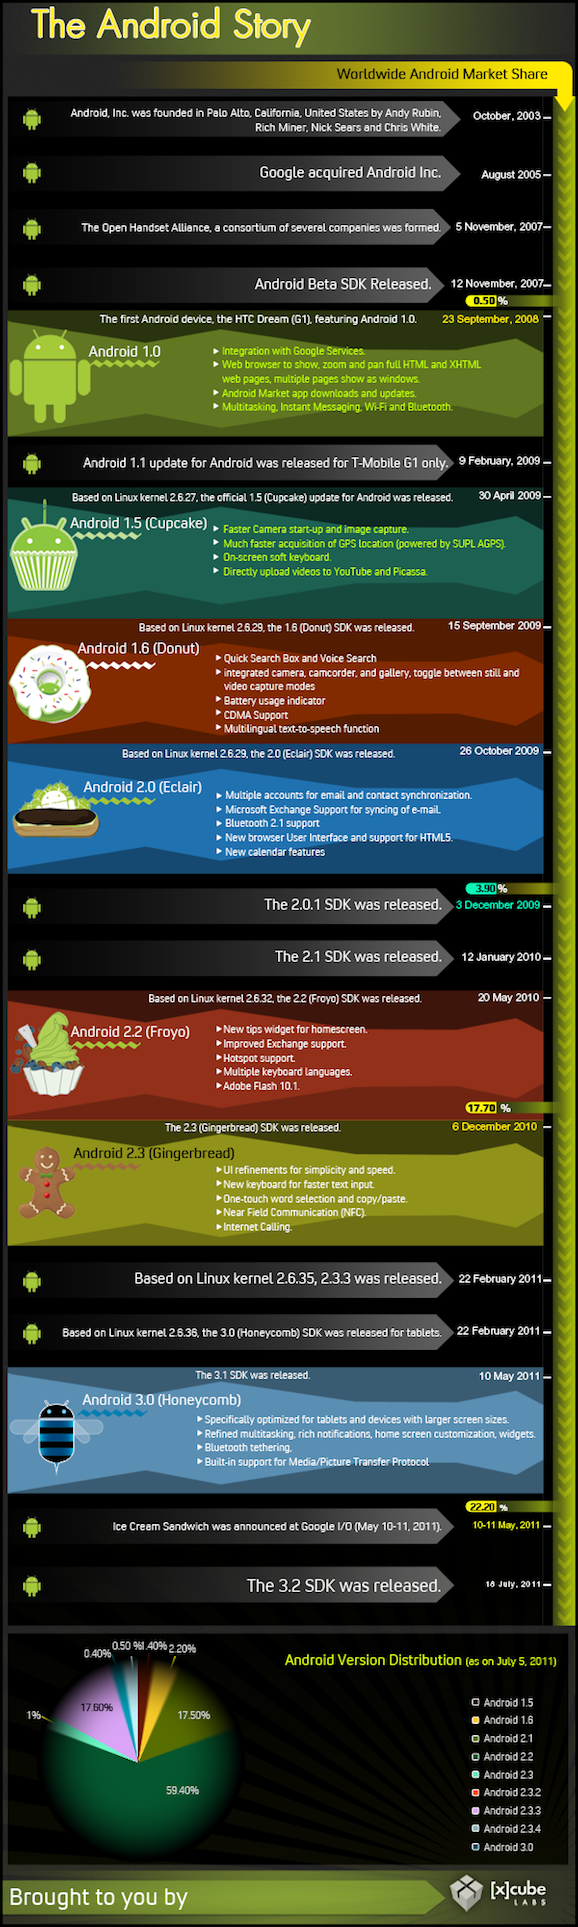 android-infographic